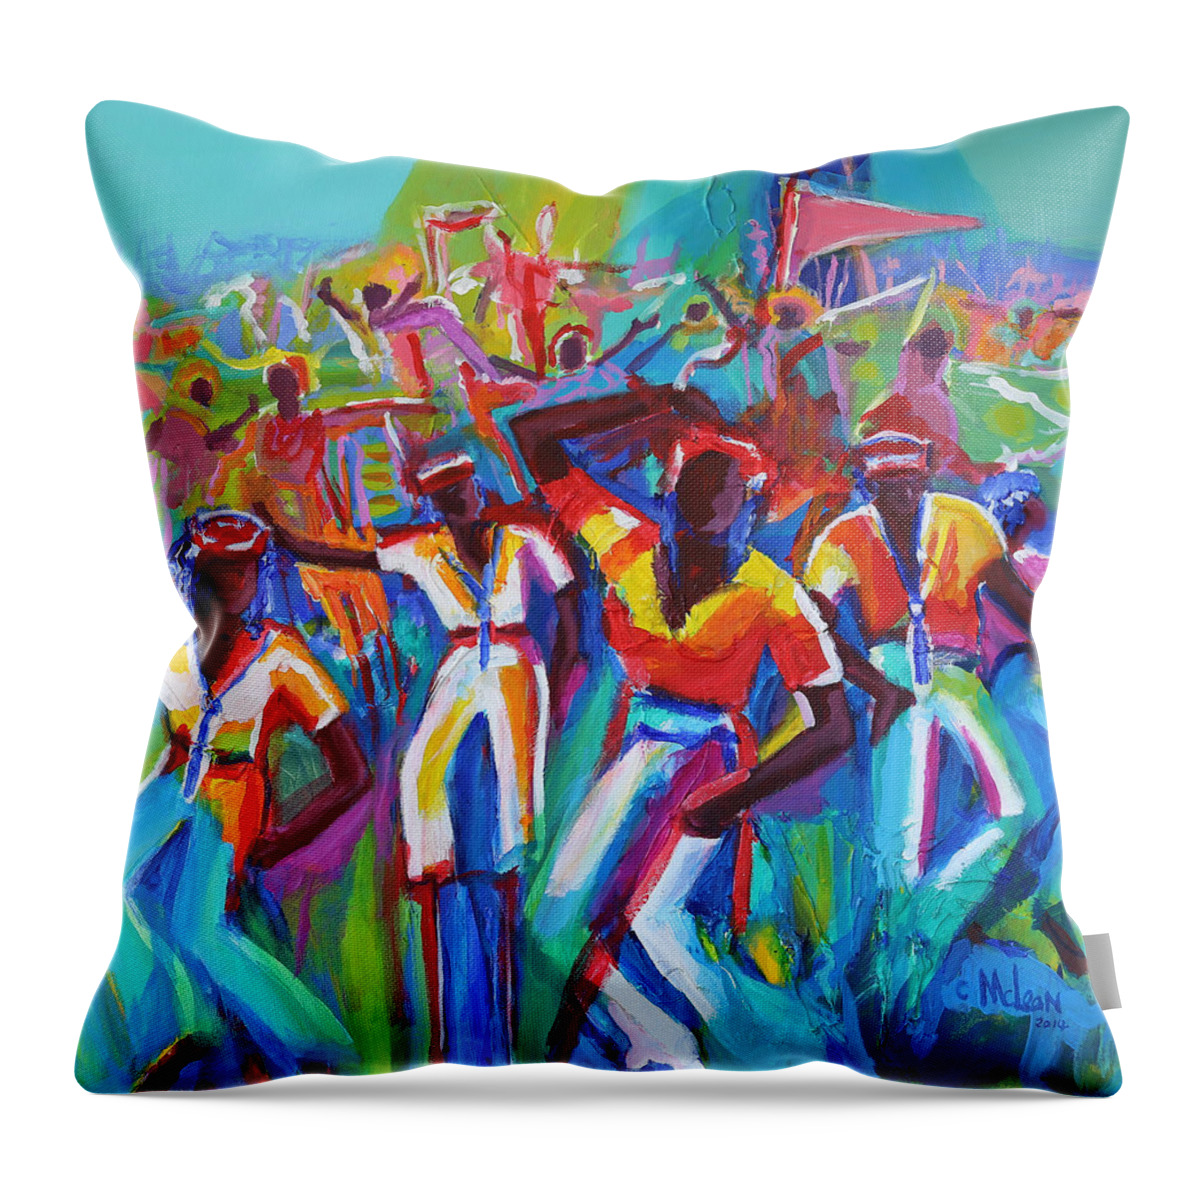 Abstract Throw Pillow featuring the painting Sailors Ashore by Cynthia McLean